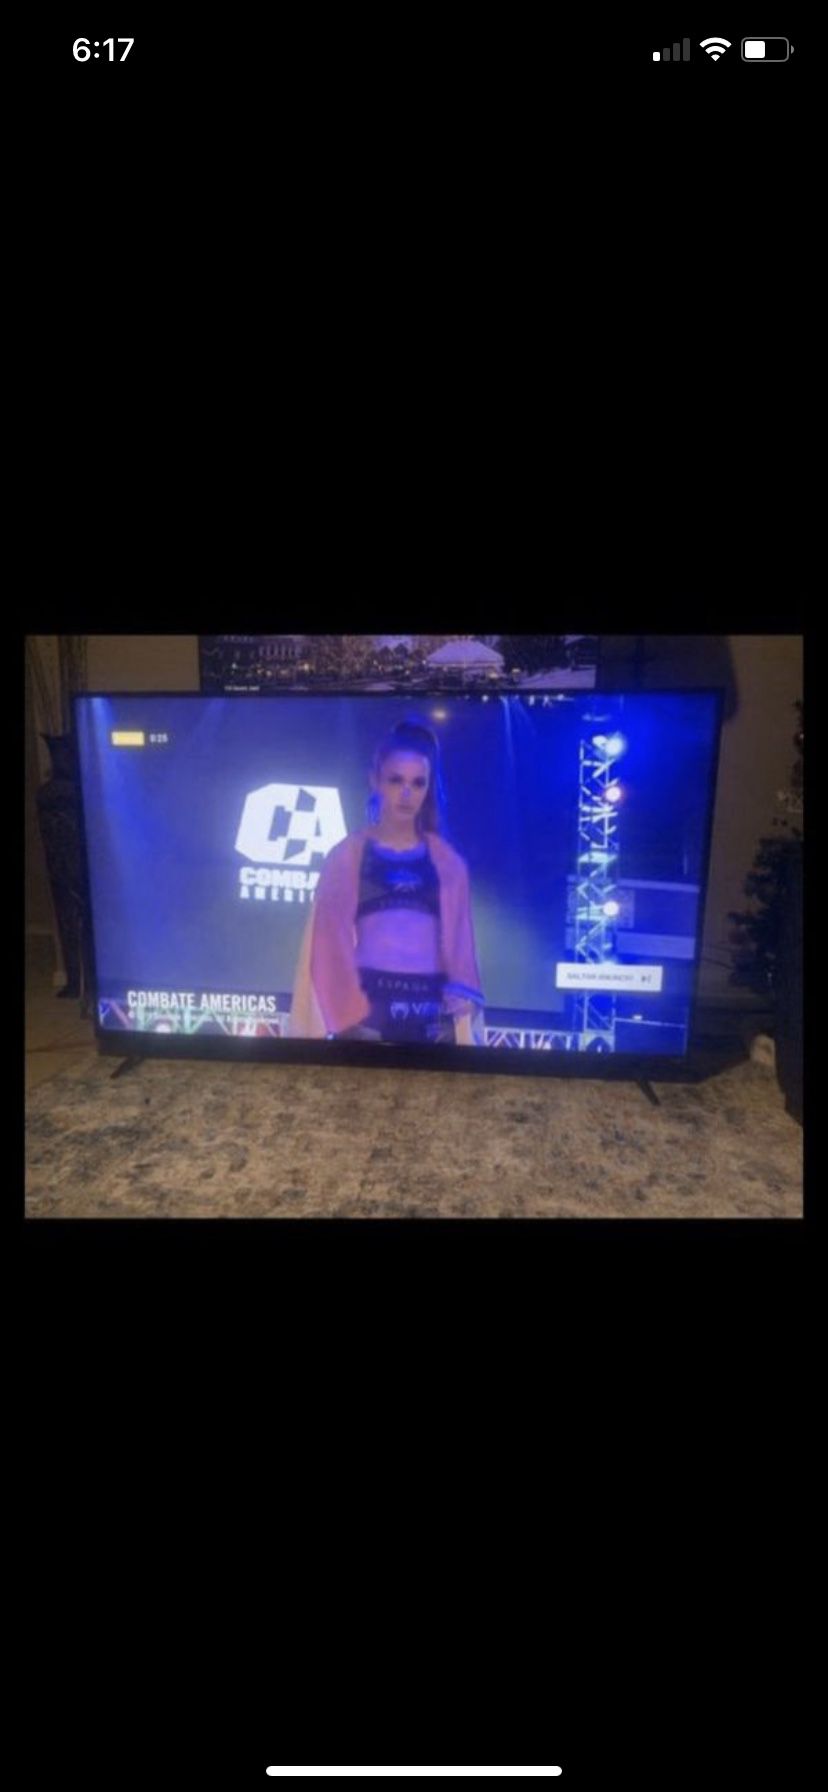 vizio 70 inch 4K Smart TV E70-E3 come with remote everything works i just upgraded asking $550